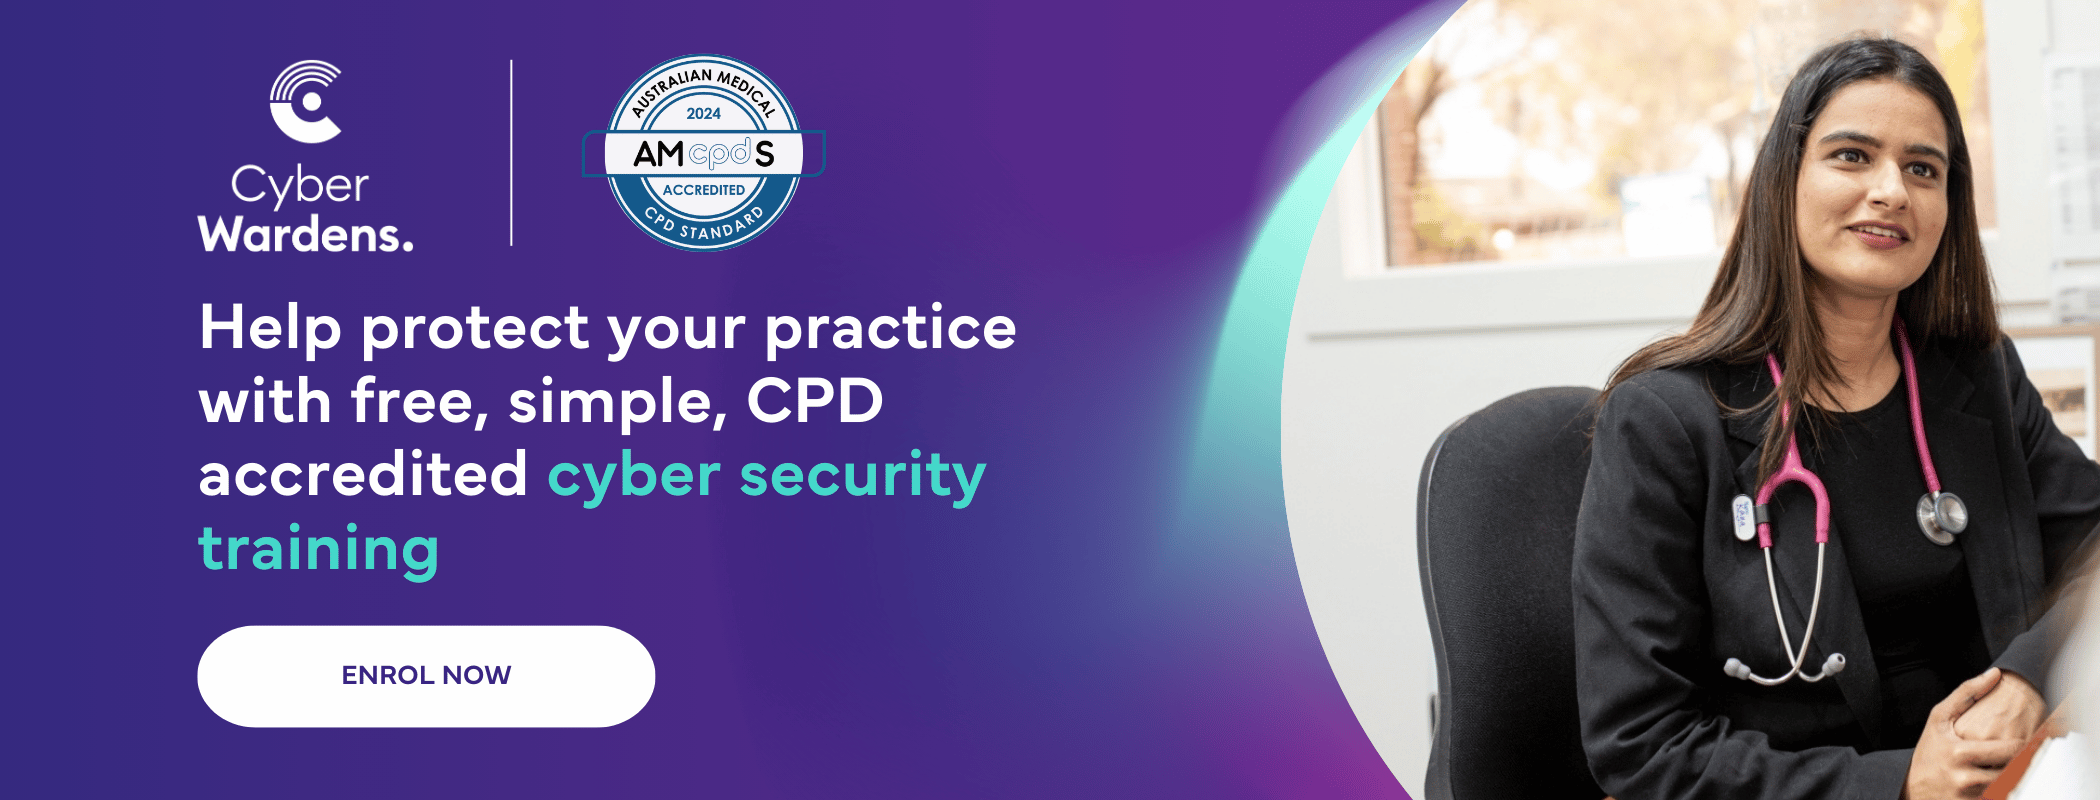 AMcpdS - become a Cyber Warden